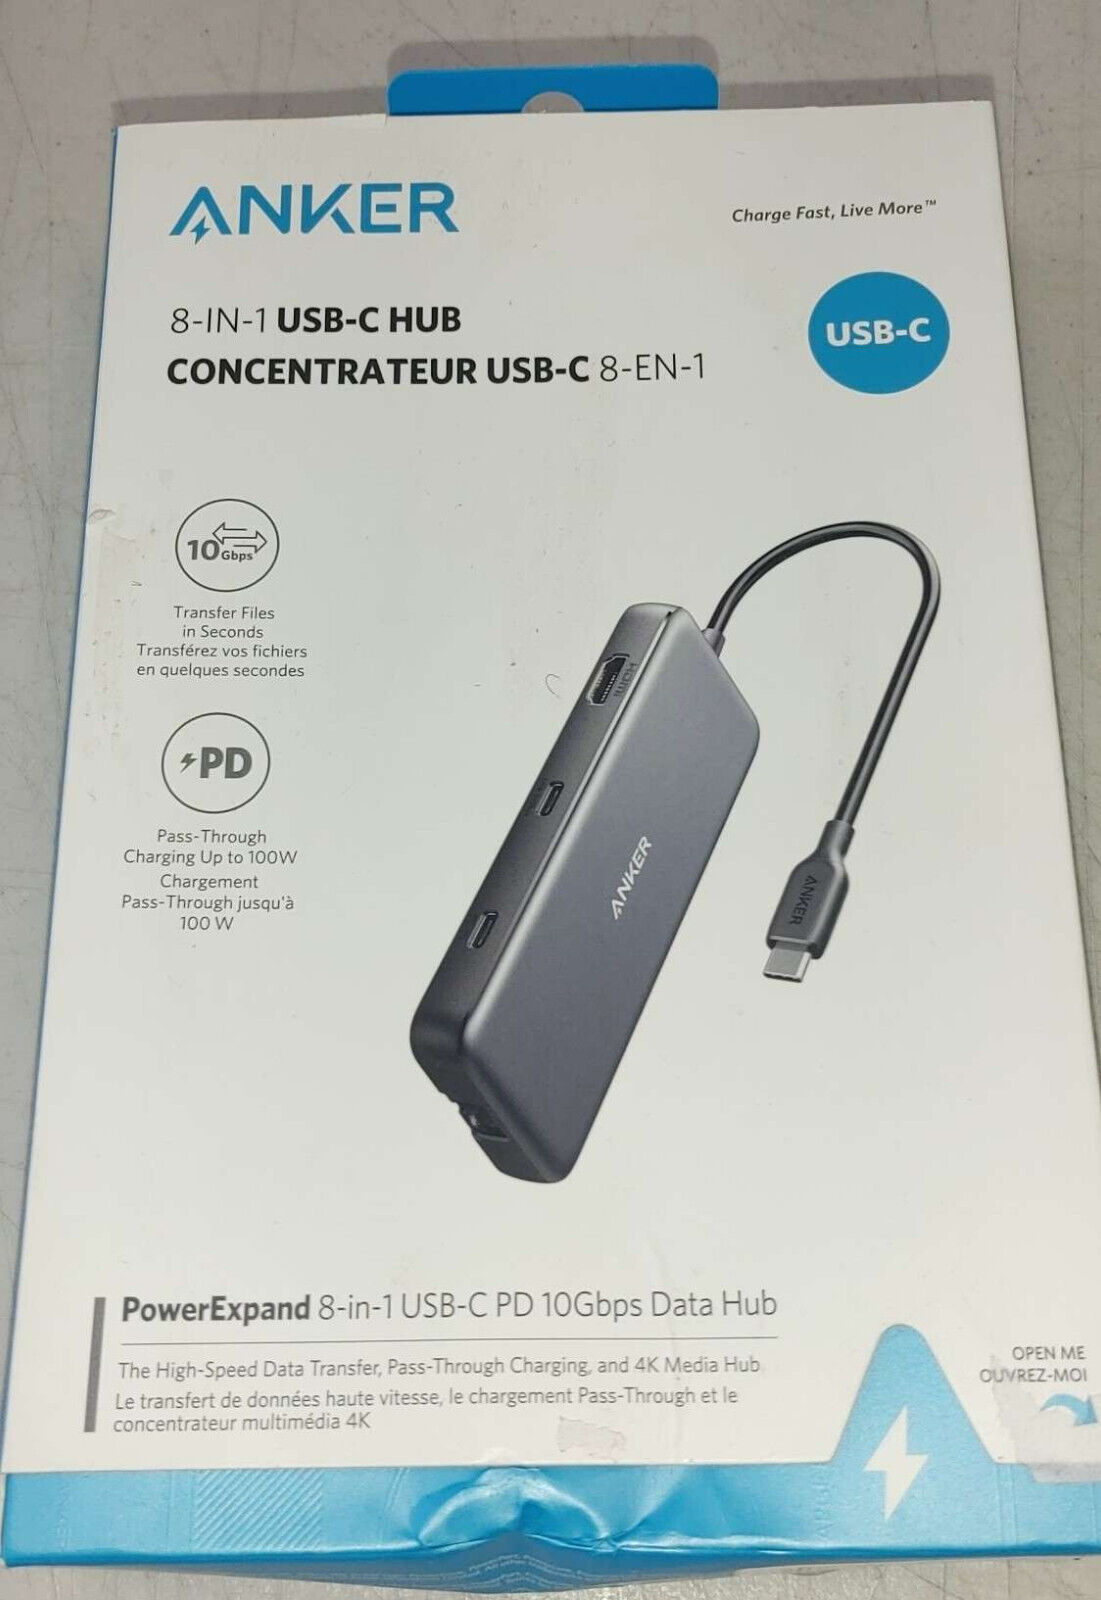 🔥🔥 Anker Power Expand 8-in-1 USB-C PD 10Gbps Data Hub / A8383